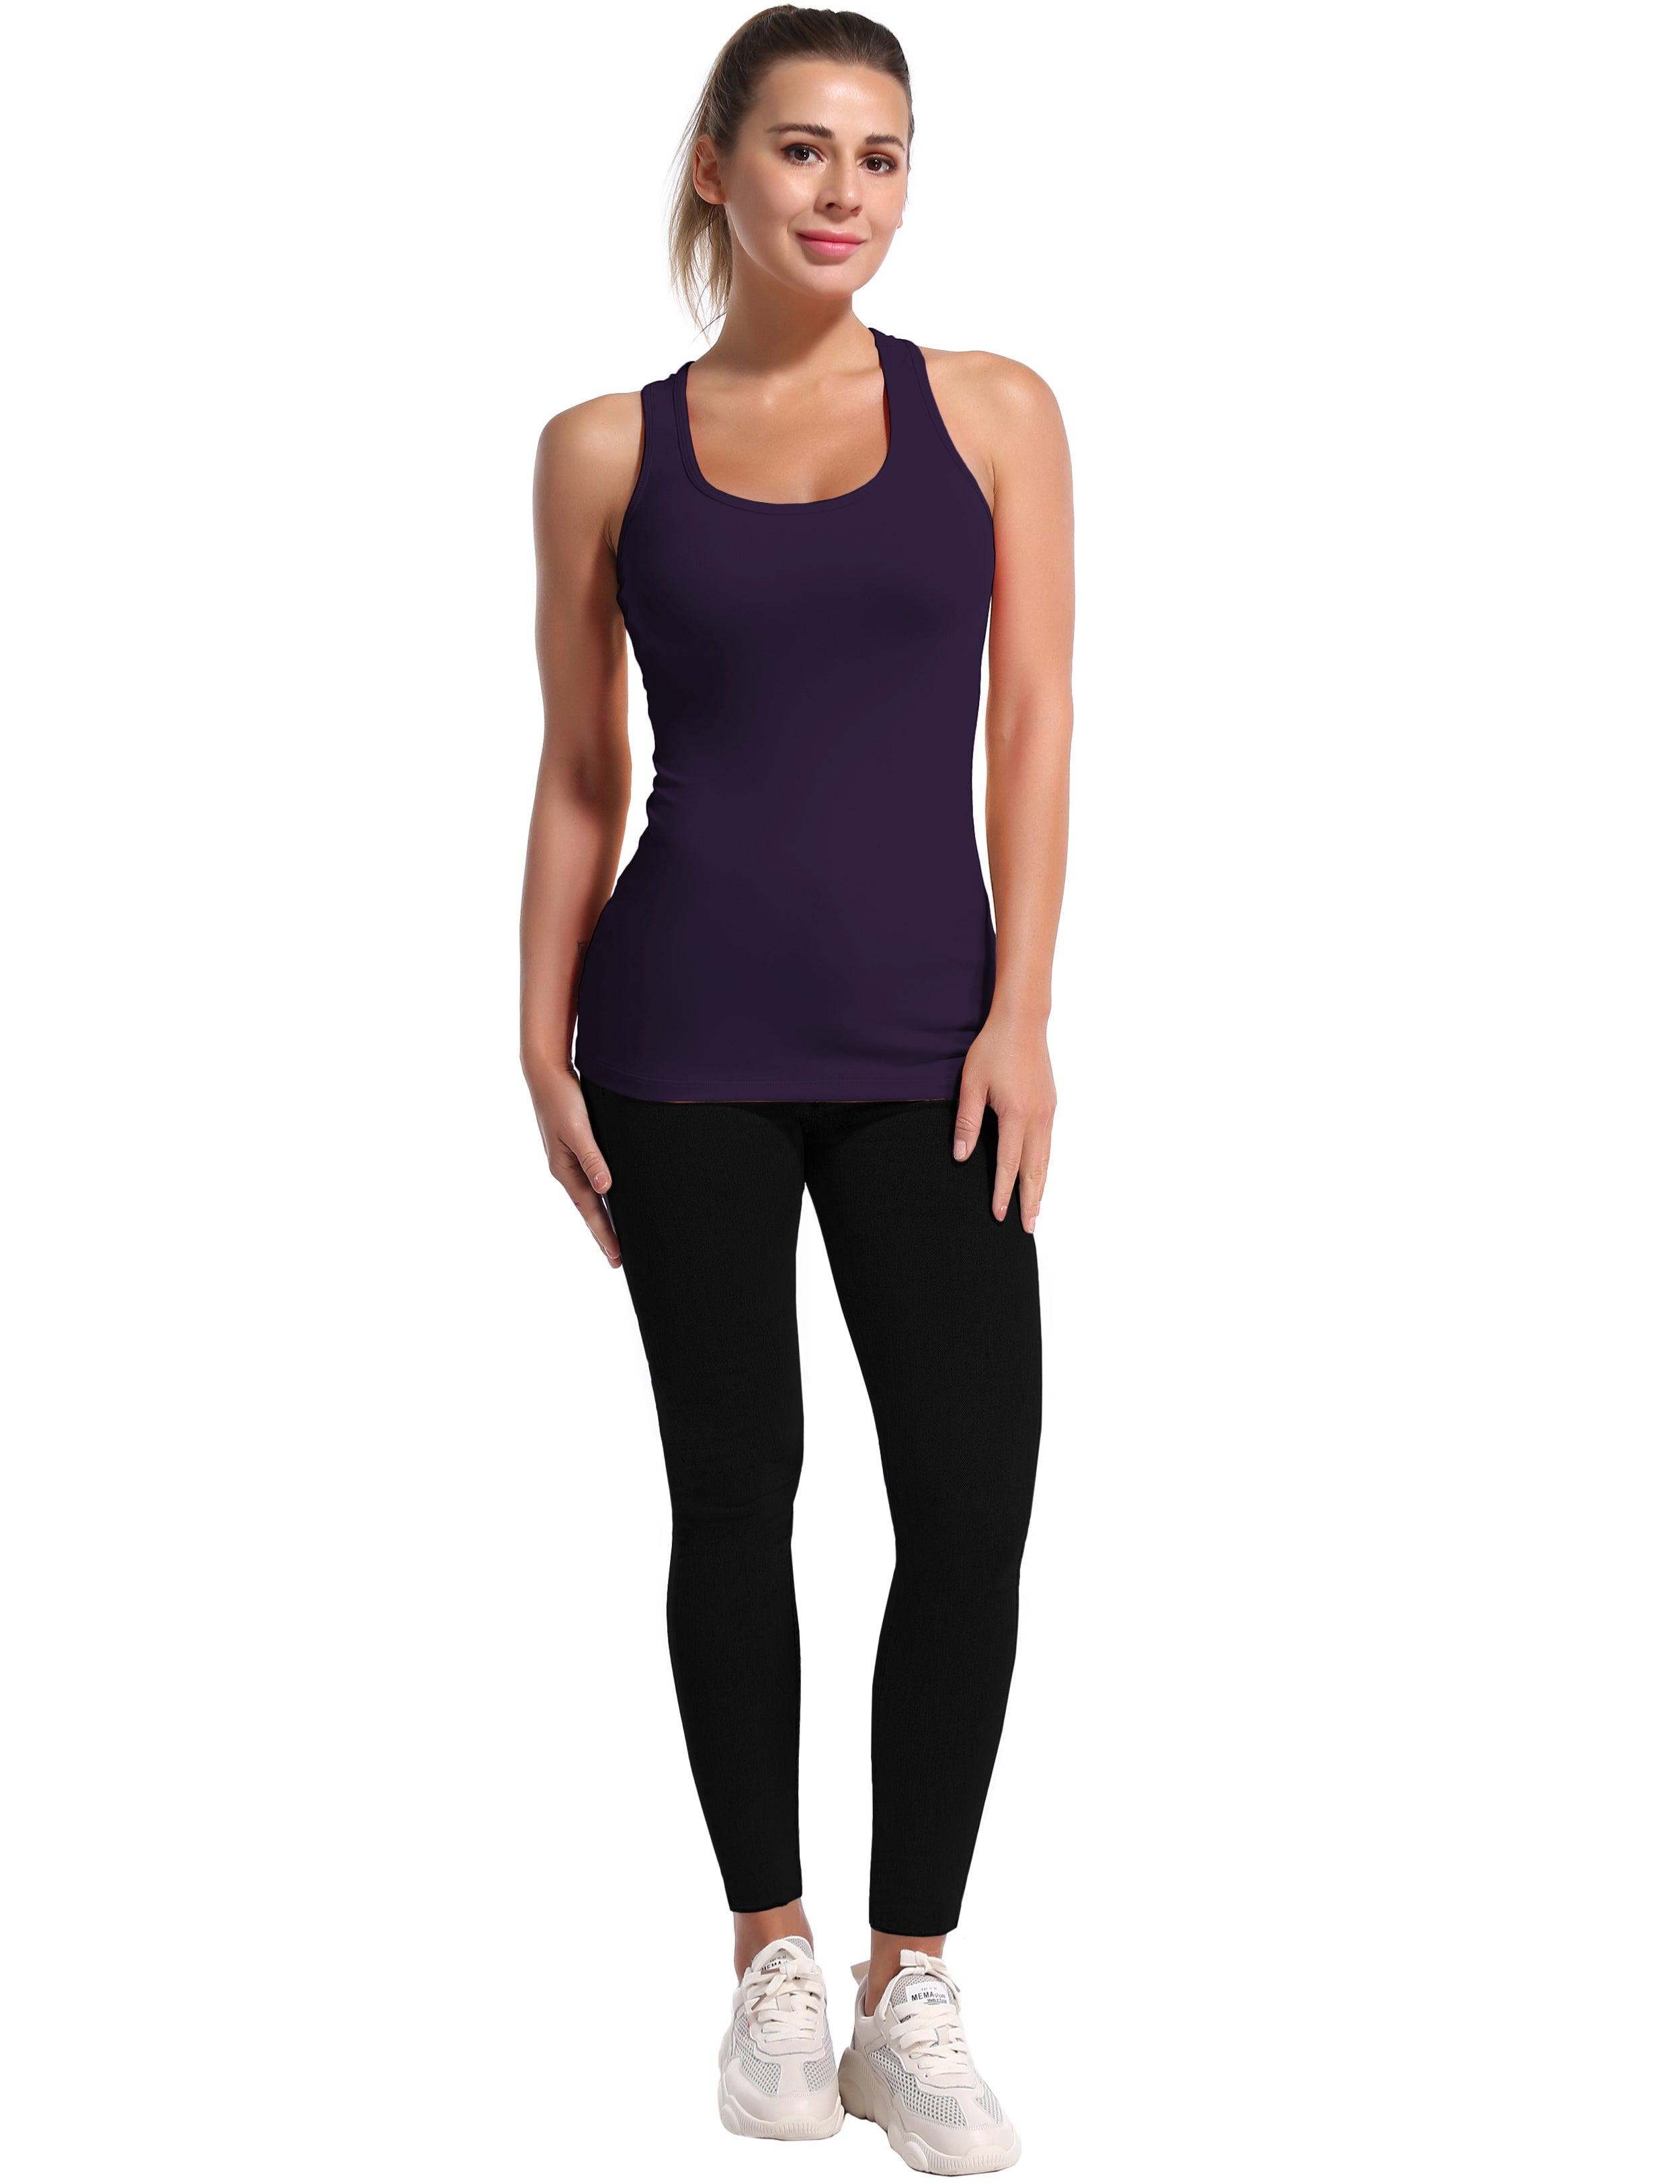 Racerback Athletic Tank Tops midnightblue 92%Nylon/8%Spandex(Cotton Soft) Designed for Jogging Tight Fit So buttery soft, it feels weightless Sweat-wicking Four-way stretch Breathable Contours your body Sits below the waistband for moderate, everyday coverage